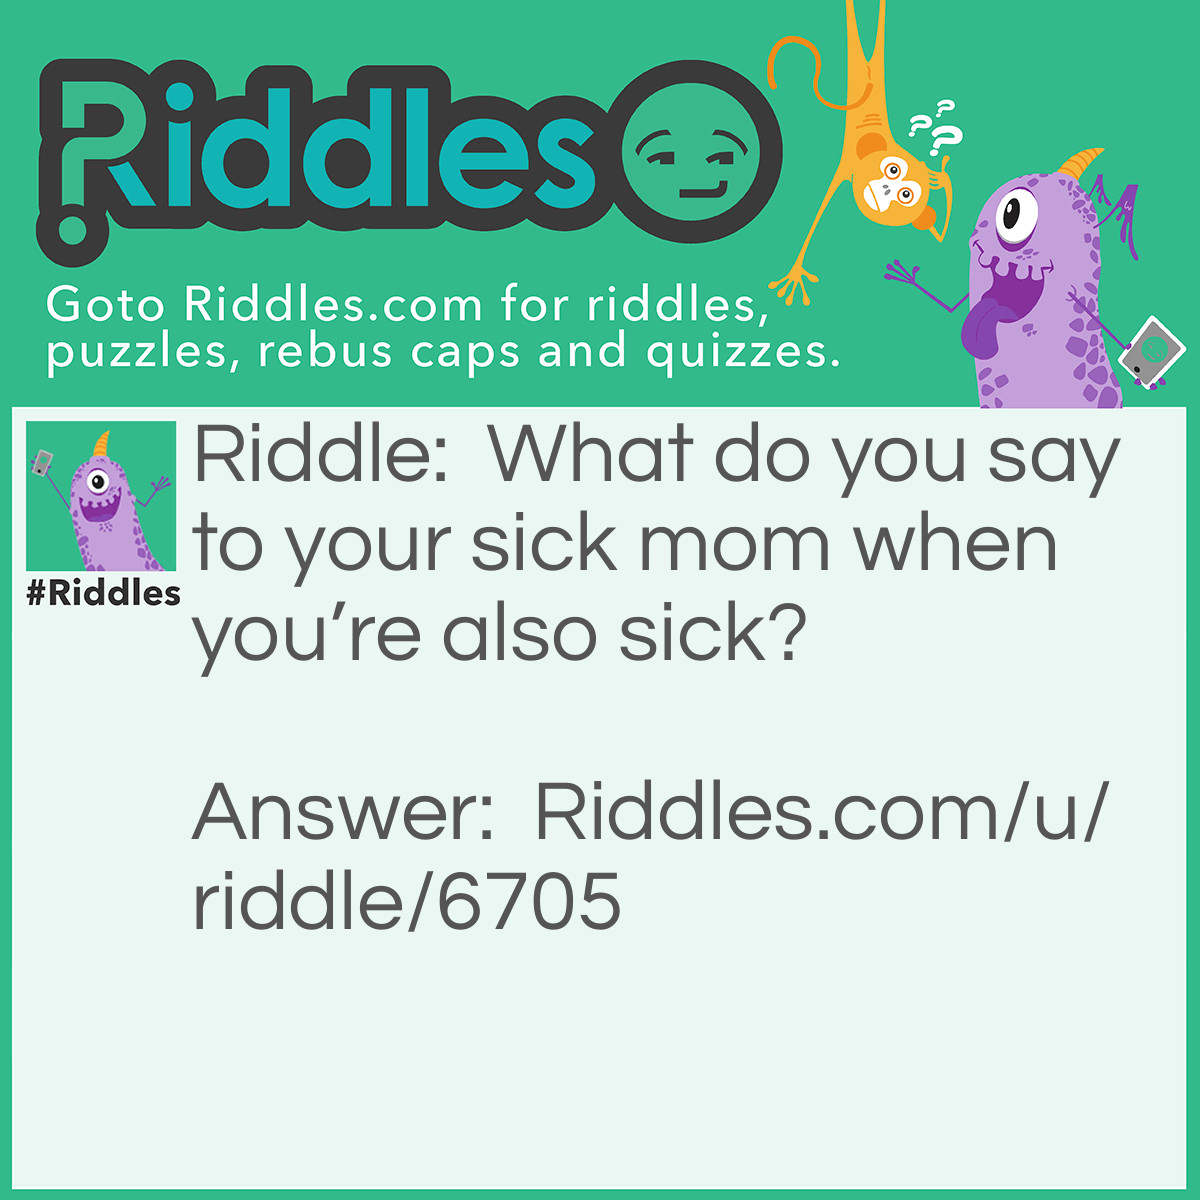 Riddle: What do you say to your sick mom when you're also sick? Answer: “Get a taste of your own medicine!”